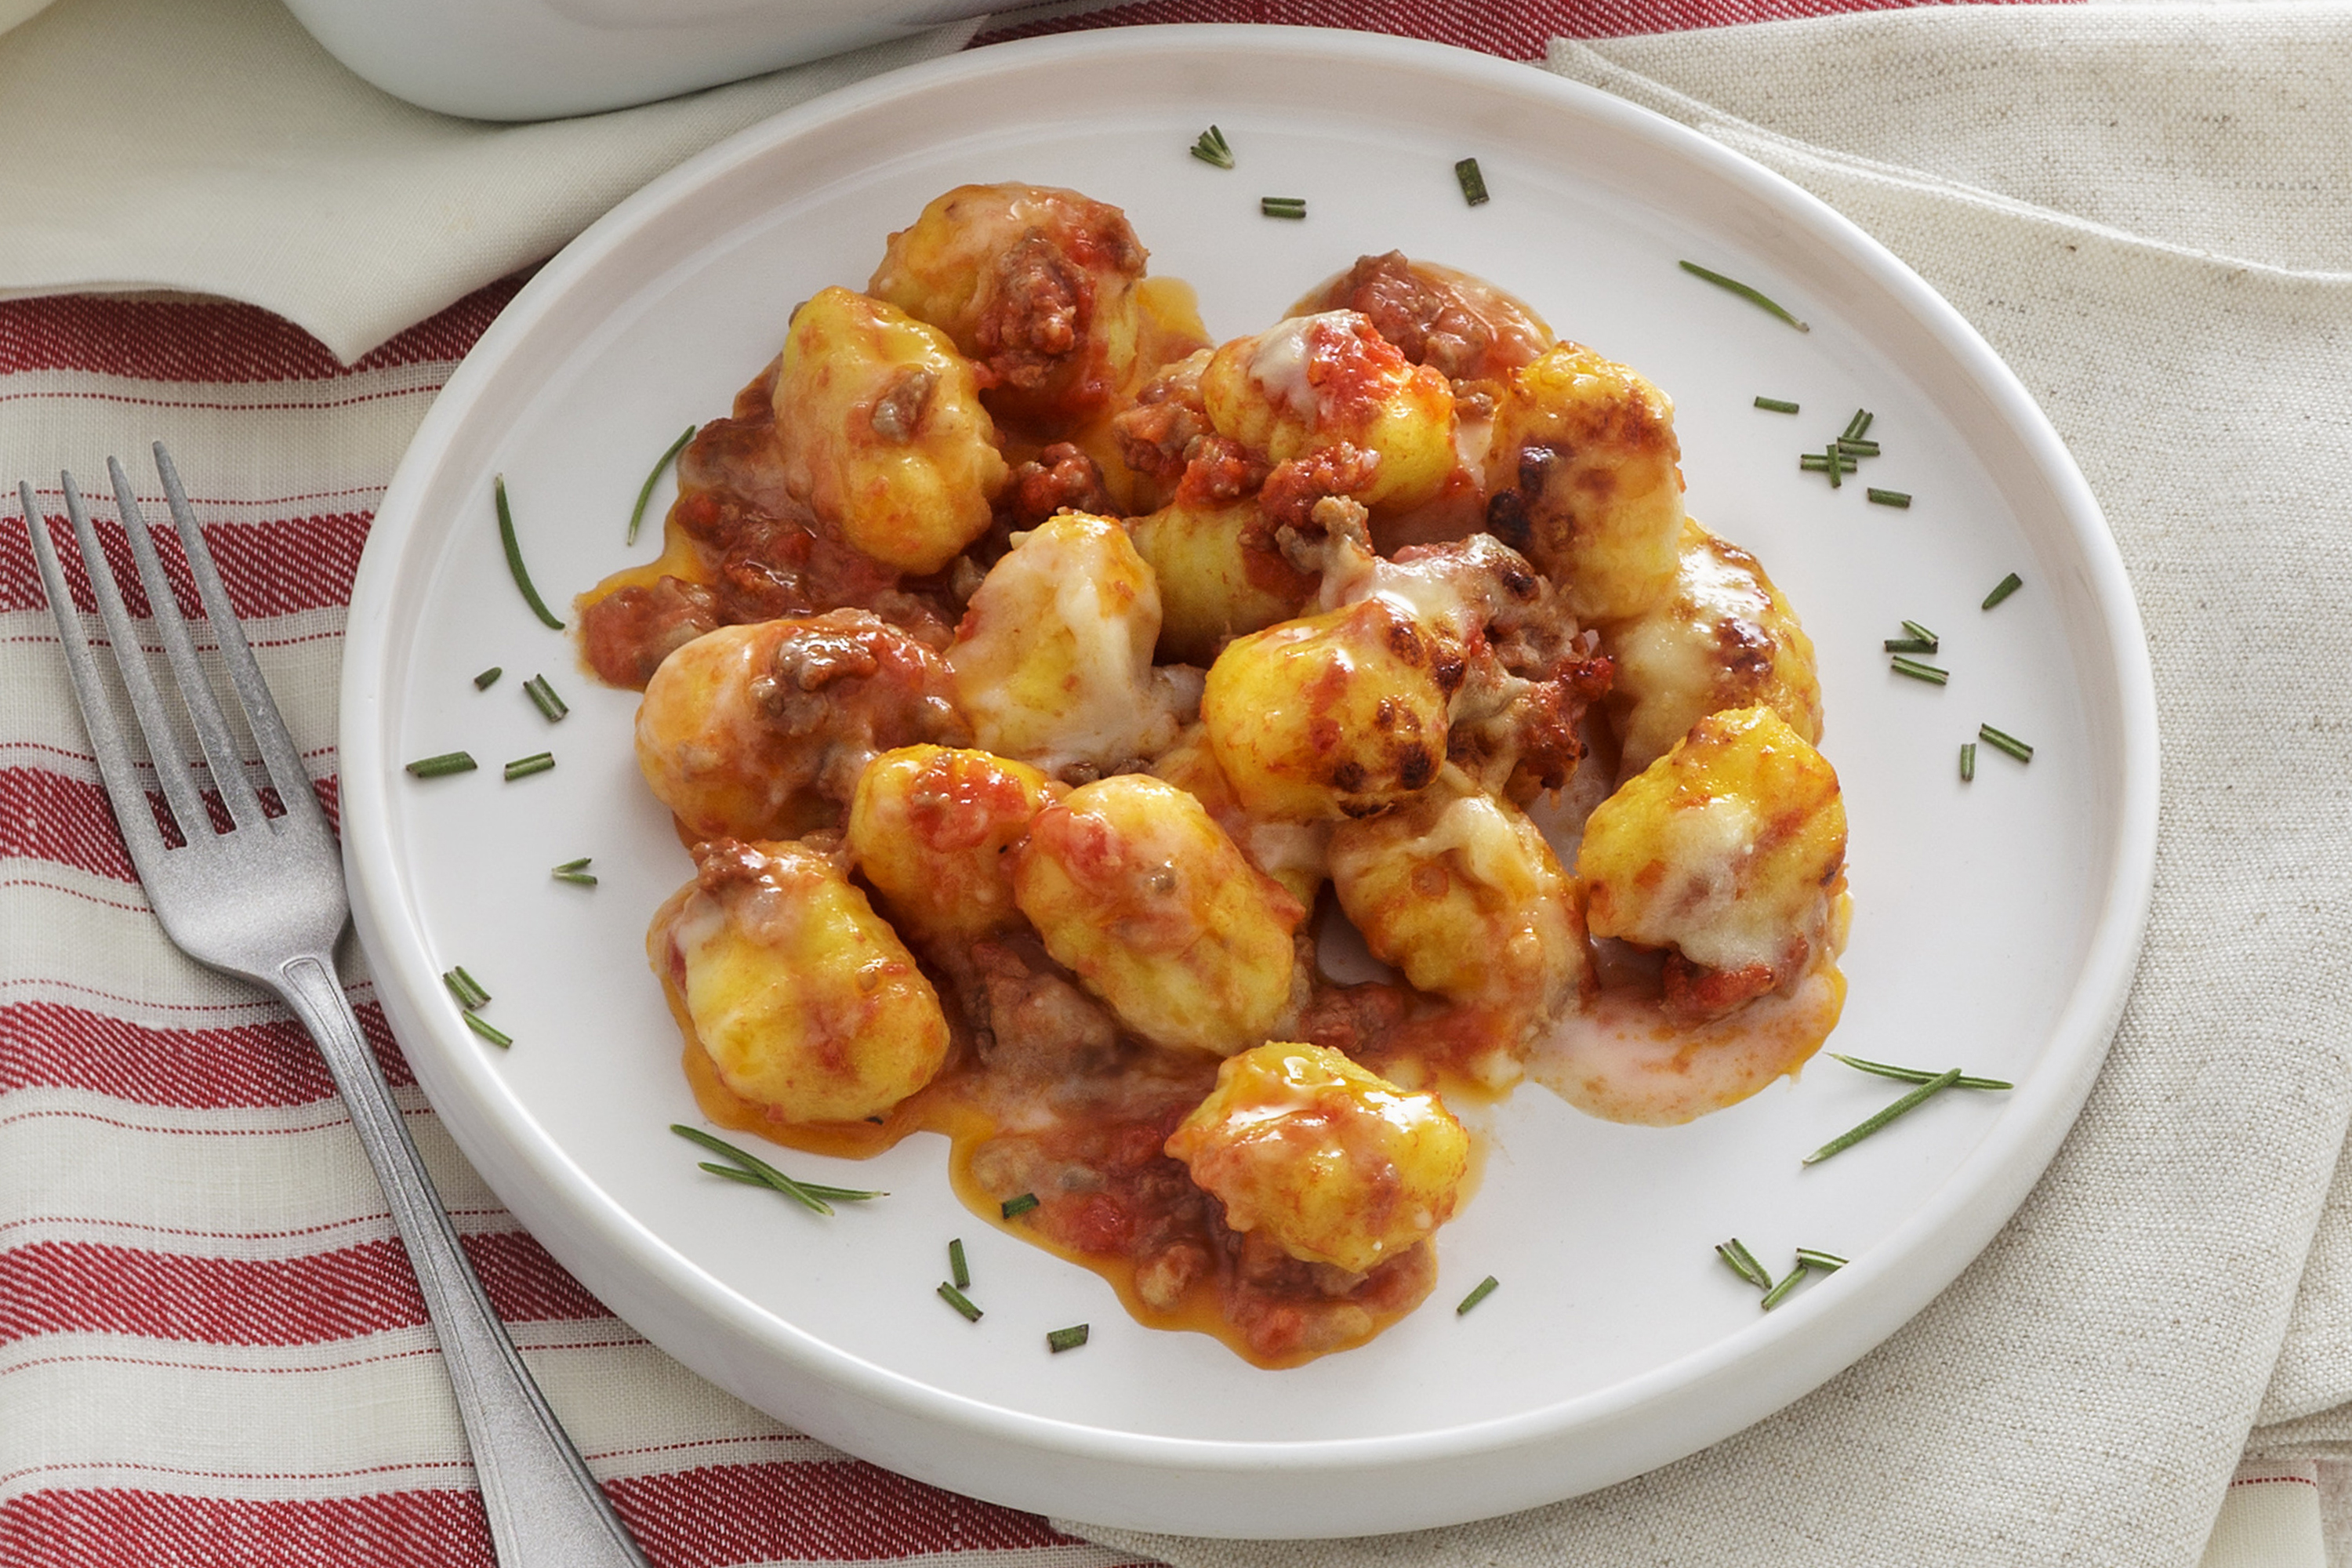 Baked Gnocchi with Spicy Meat Sauce